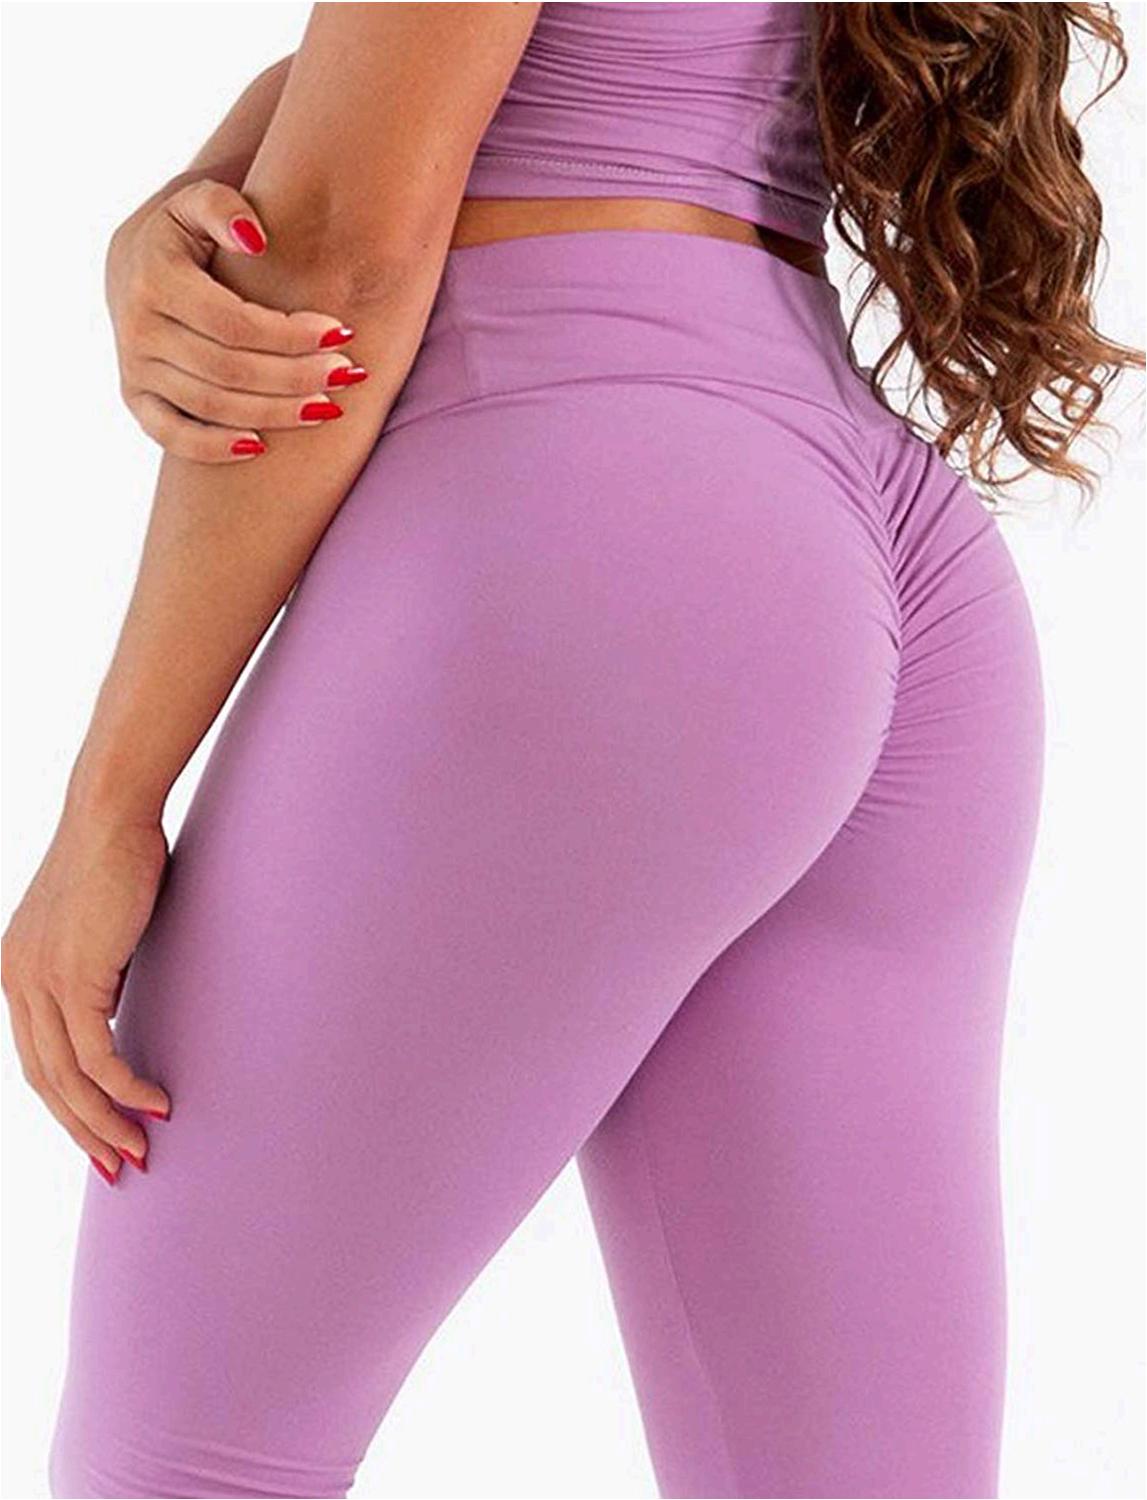 A AGROSTE High Waisted Booty Yoga Pants Seamless Butt Lifting